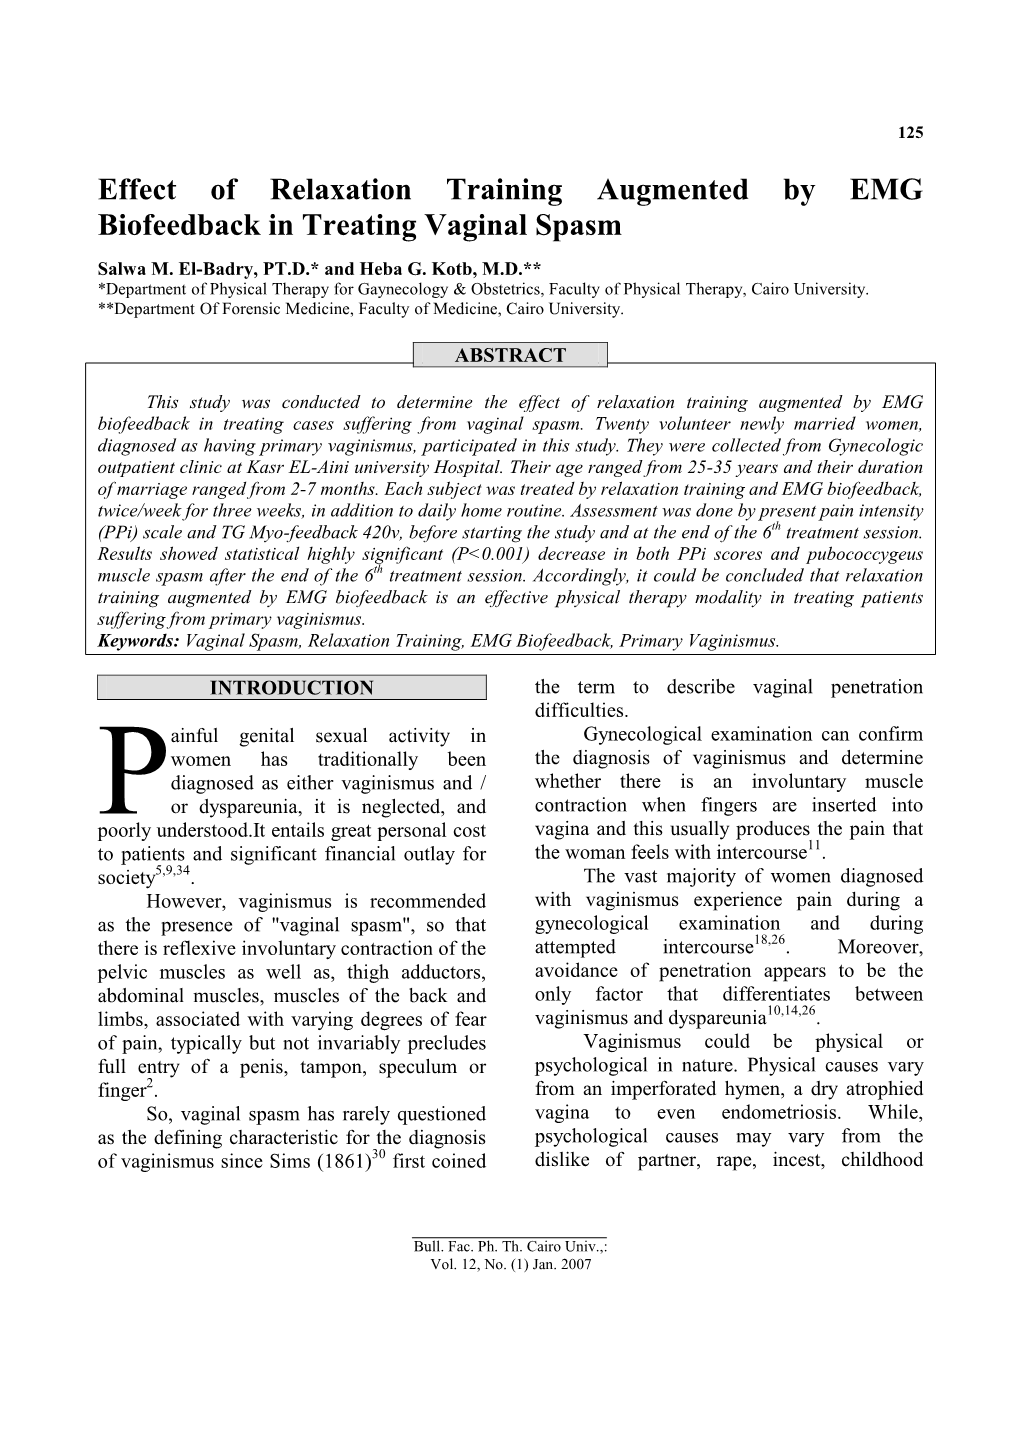 Role of Physical Therapy in Treating Vaginal Spasm